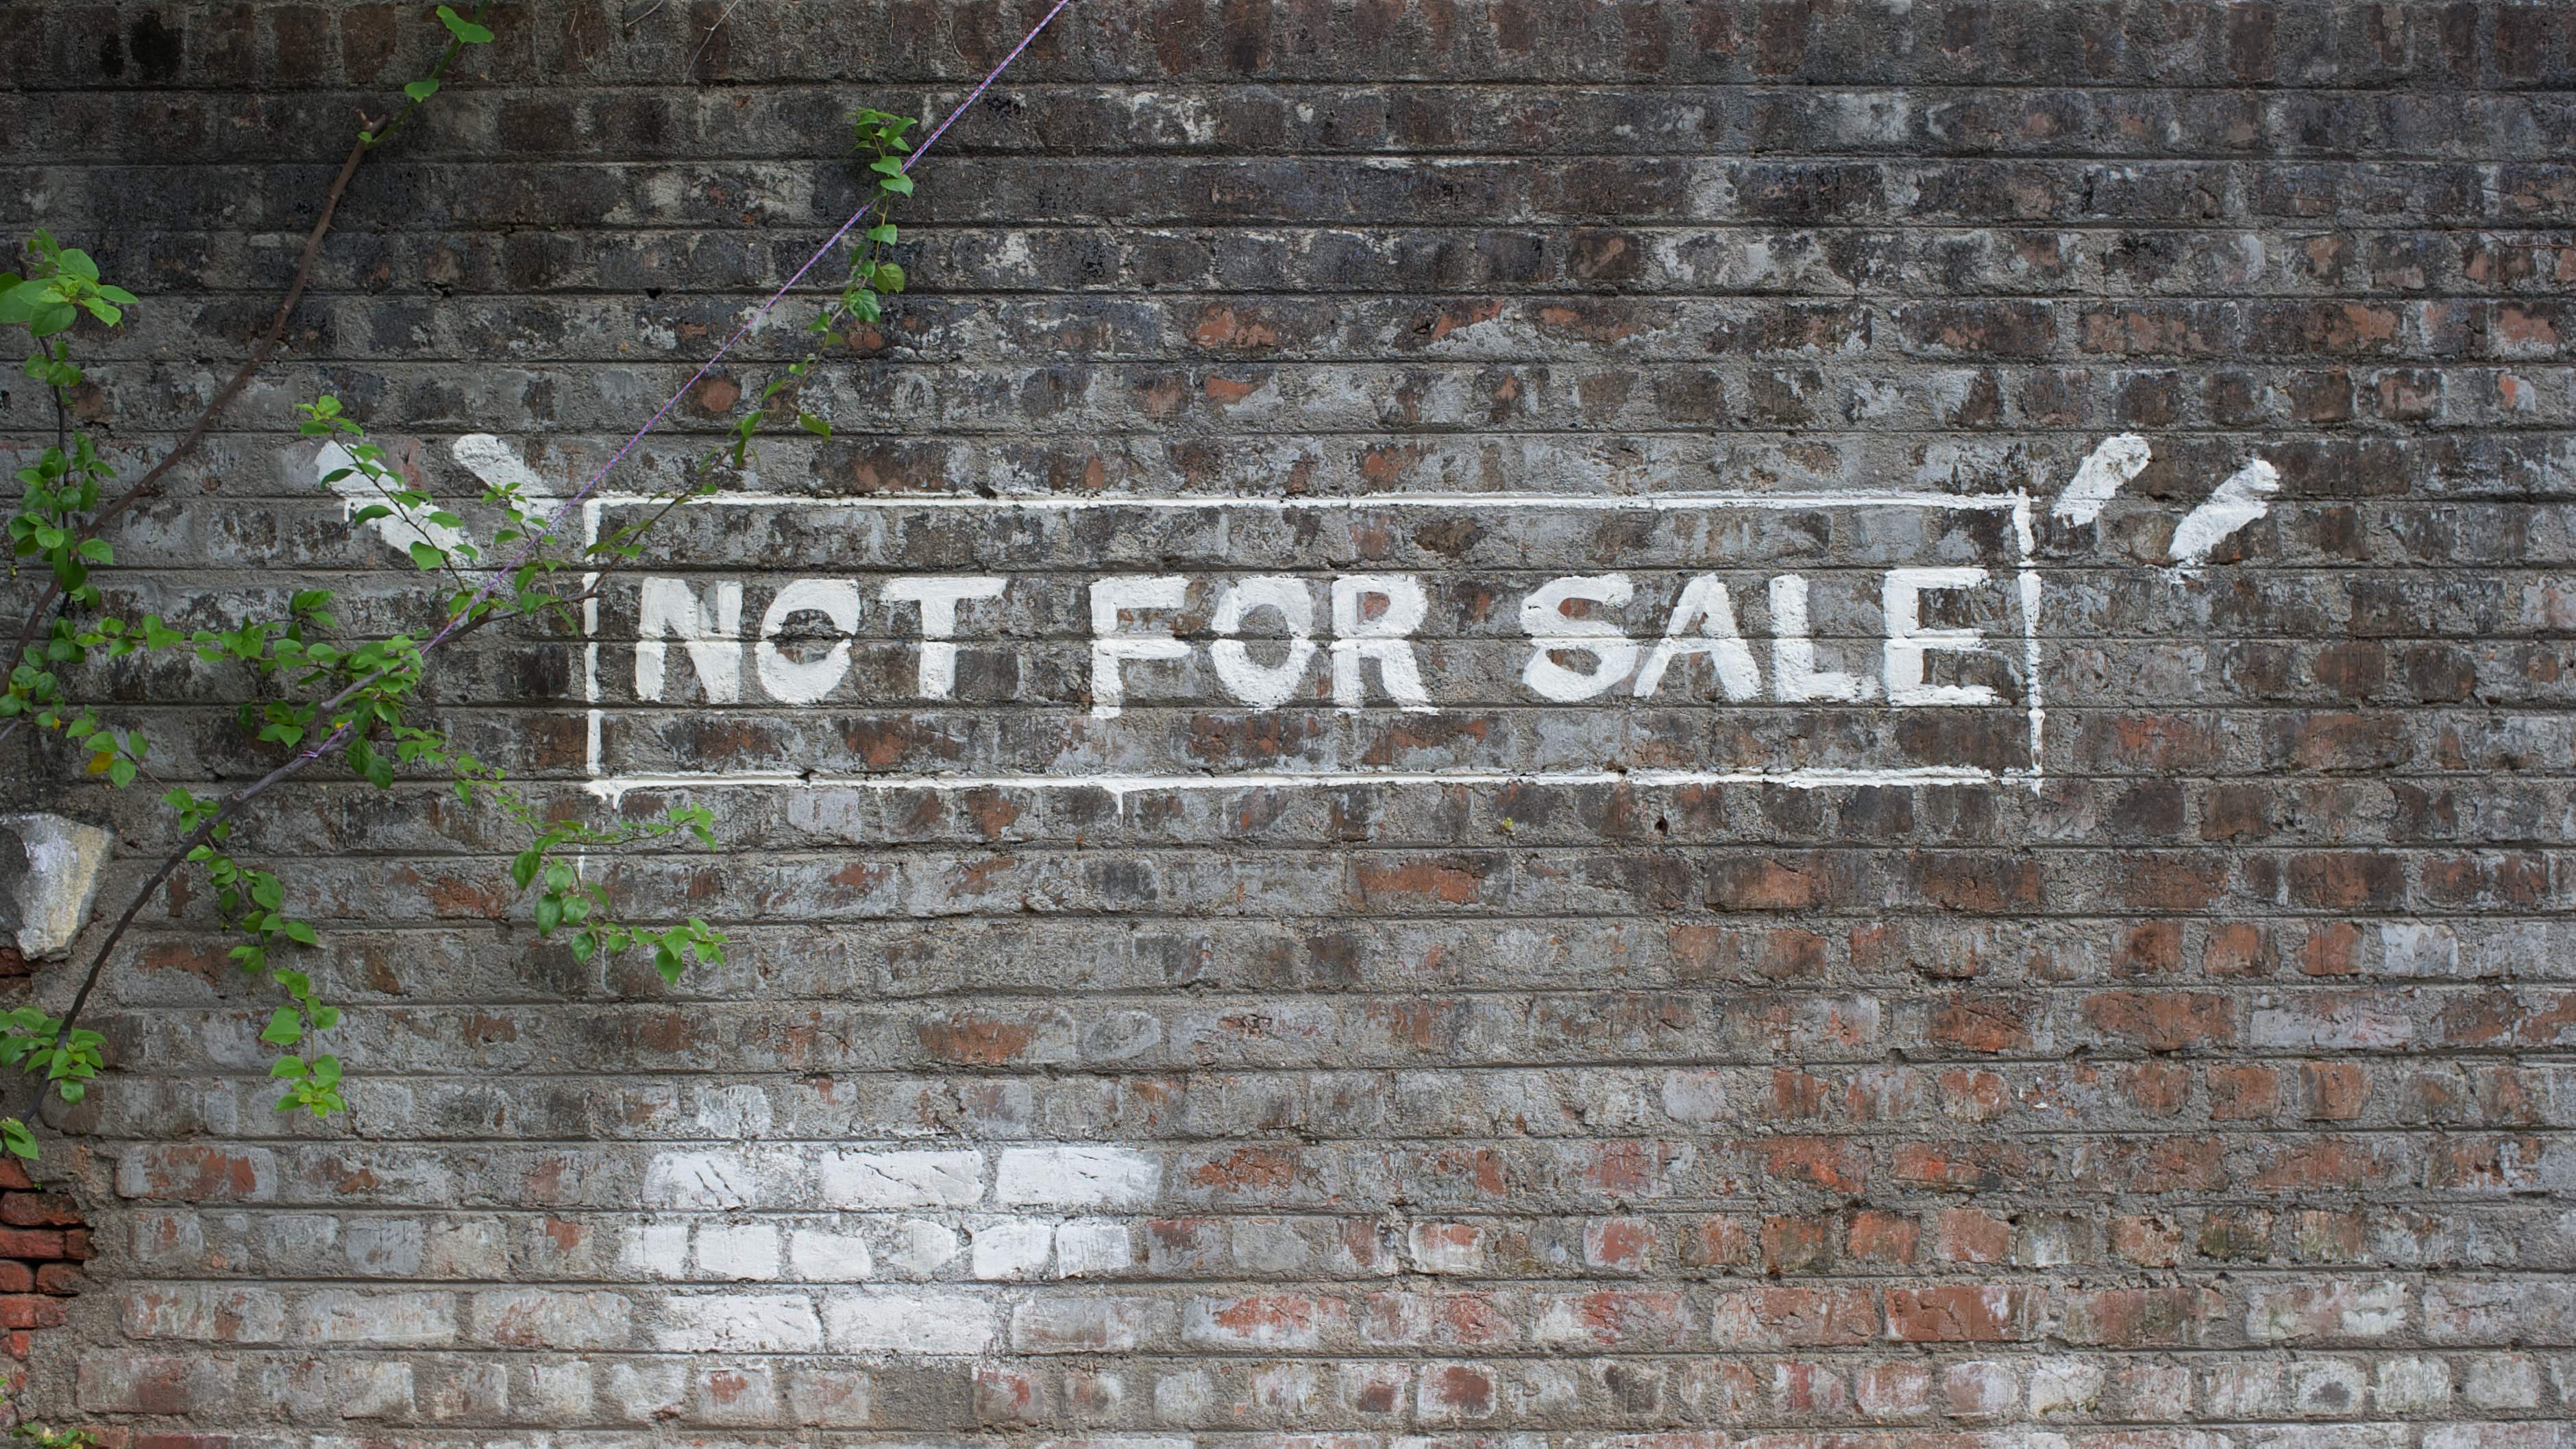 Not for sale painted in white letters on a brick wall in Pondicherry